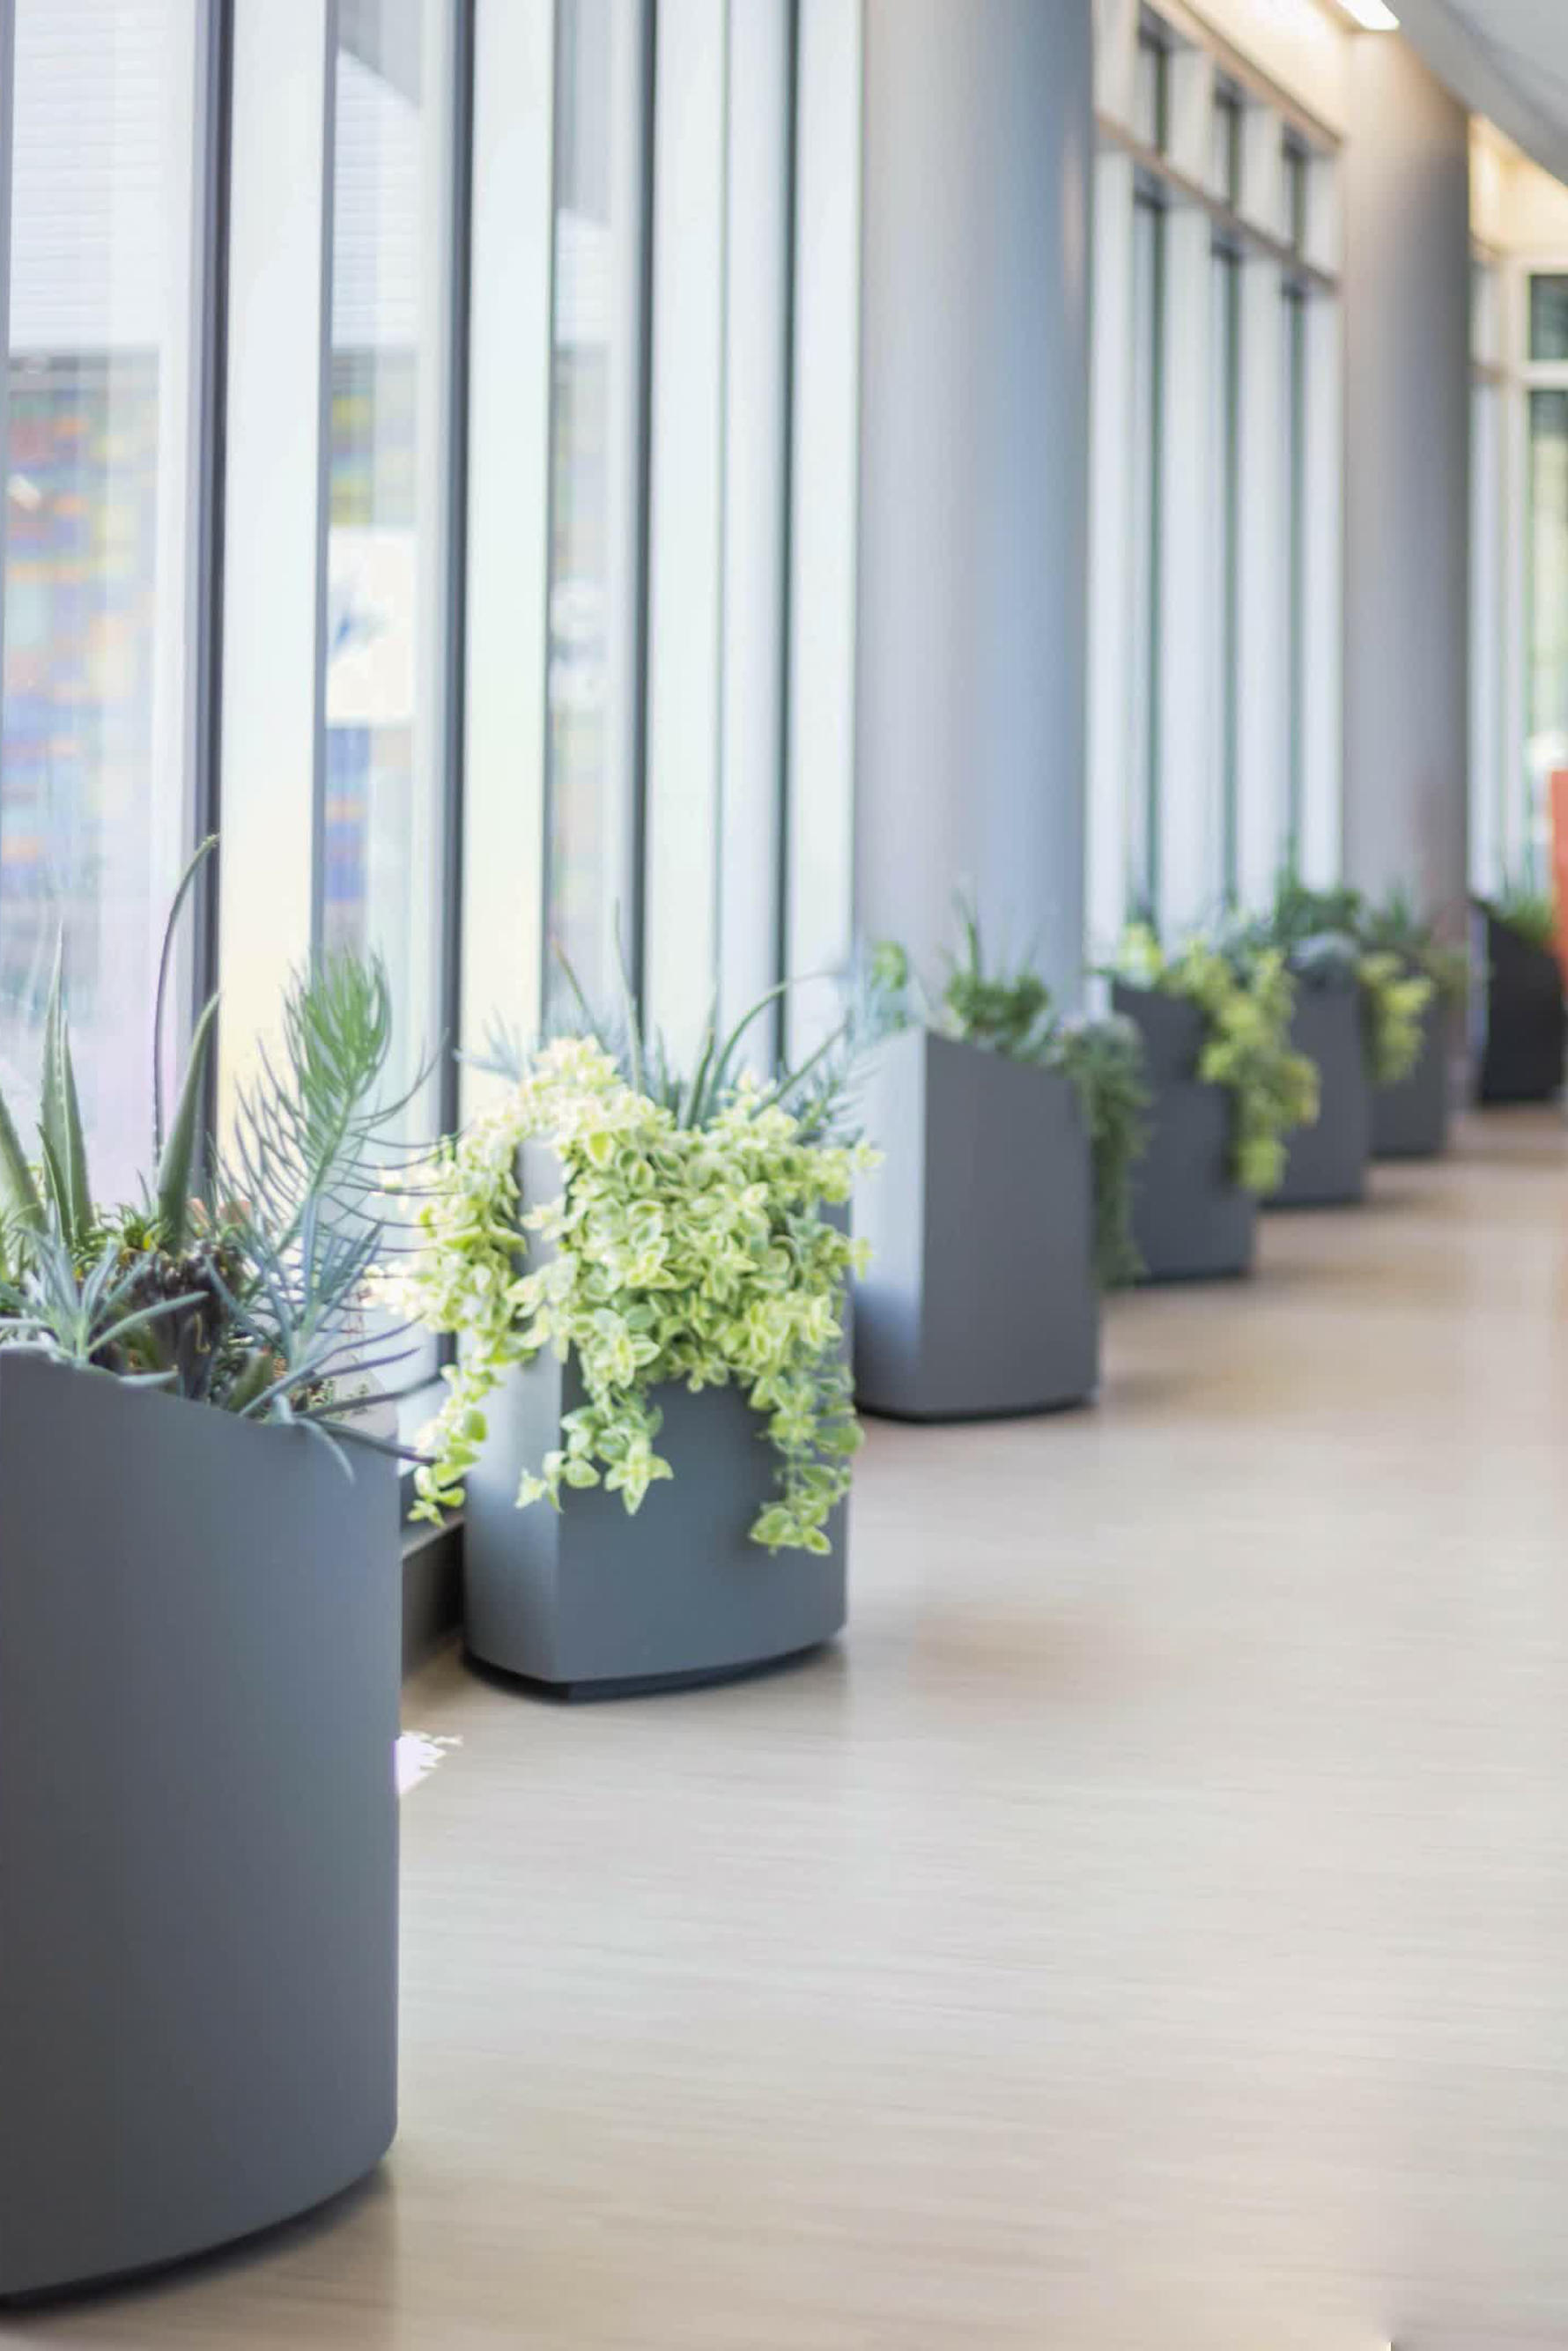 botanicals containers planted with plants lining a skywalk